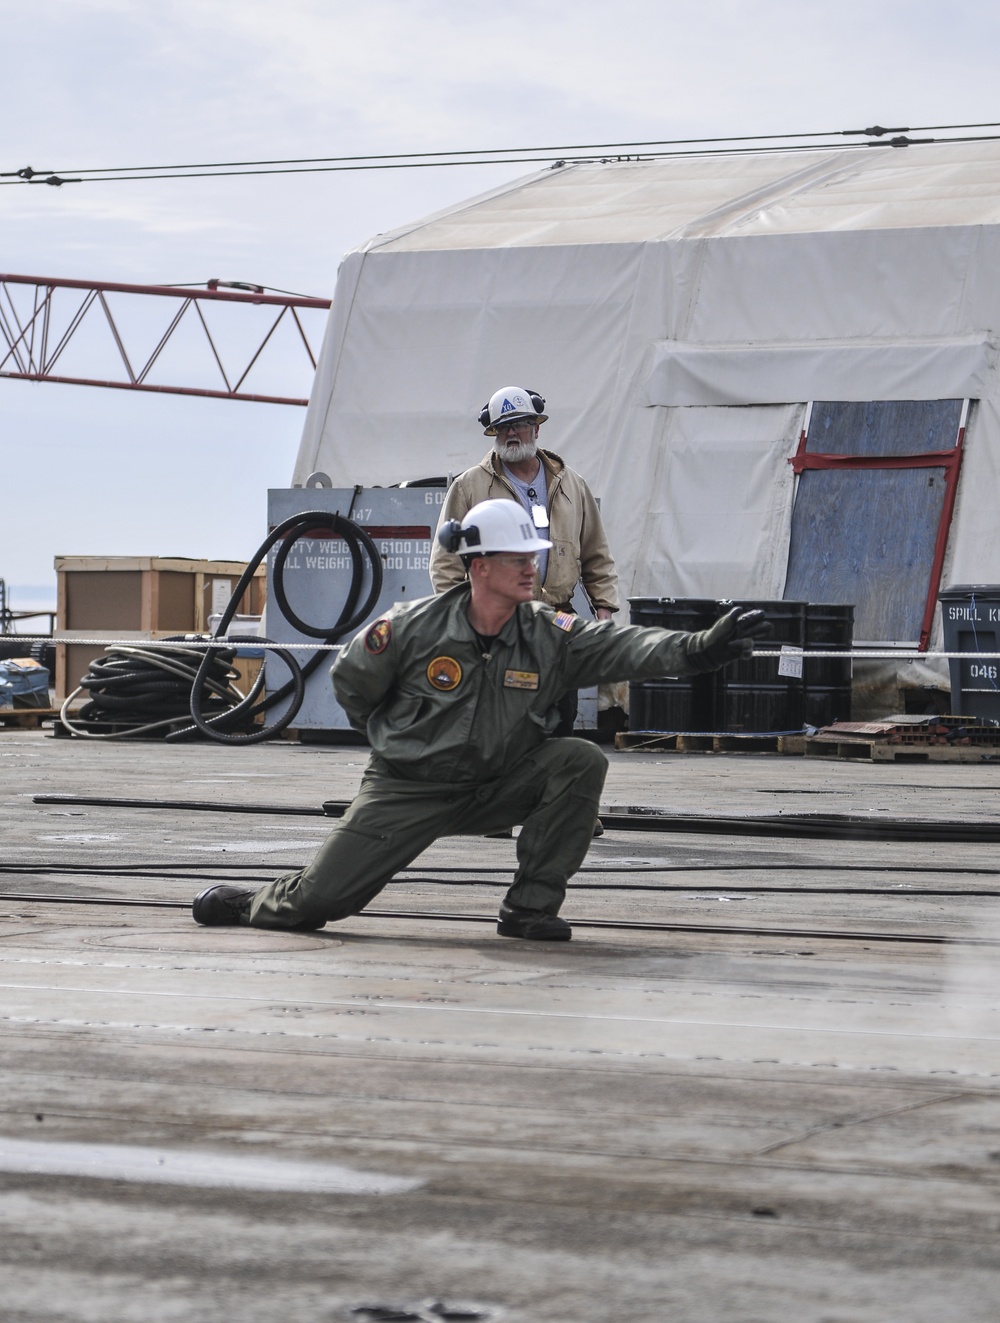 Successful testing of catapult on flight deck of USS Abraham Lincoln